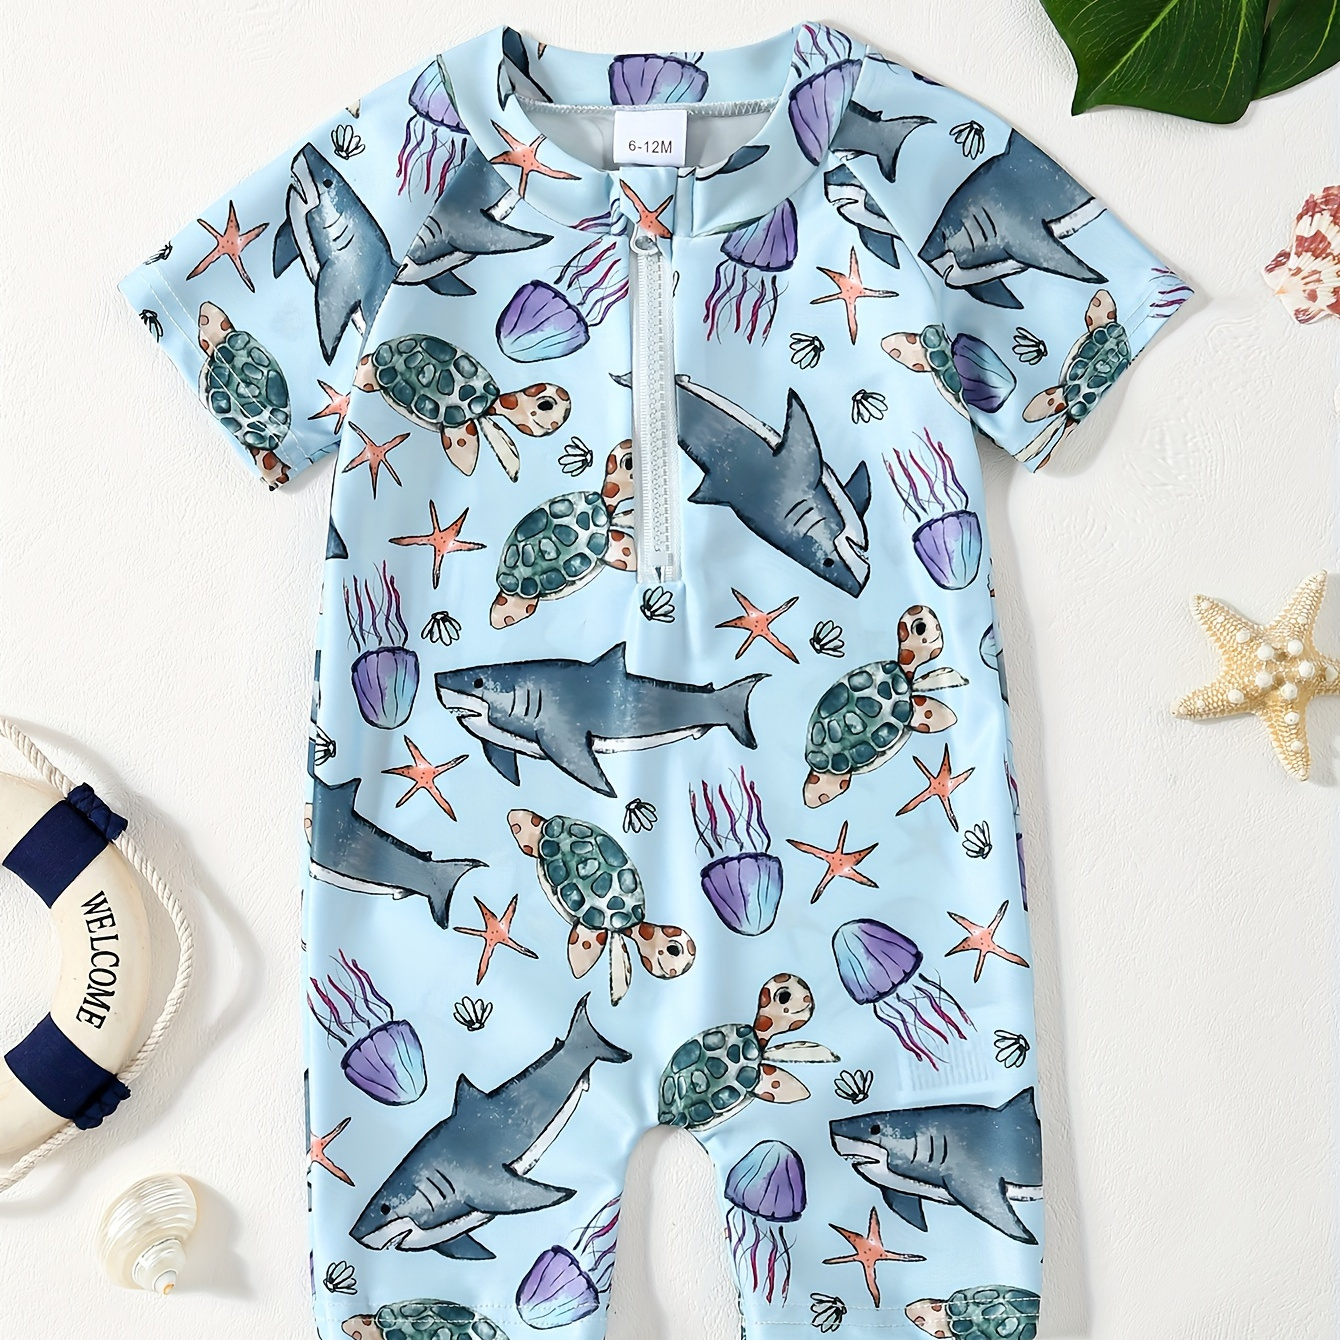 

Toddler Kid's Cartoon Shark & Jellyfish Pattern One-piece Swimsuit, Stretchy Bathing Suit, Baby Boy's Swimwear For Beach Vacation